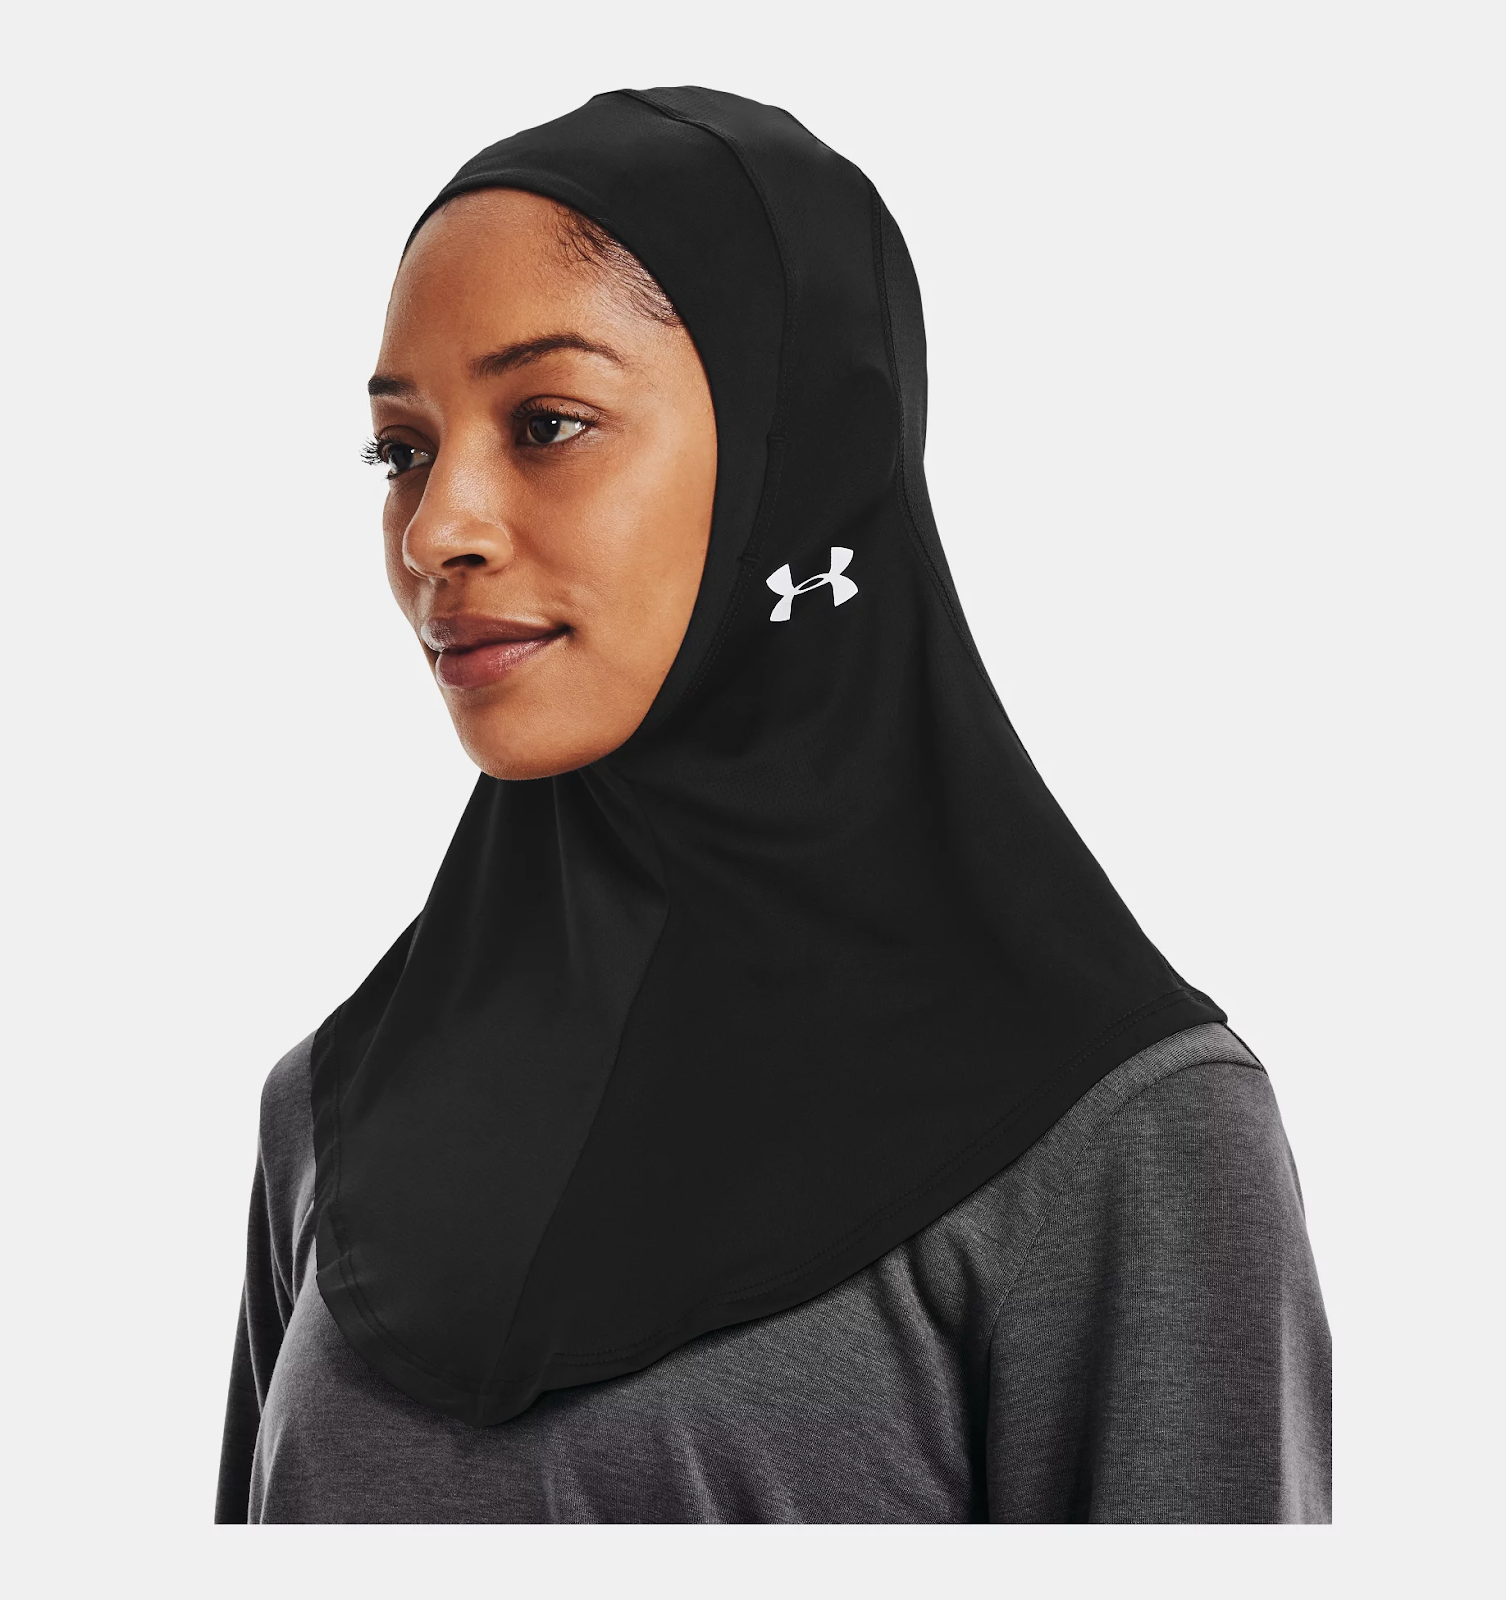 Top 10 Products from Under Armour Malaysia Women Need to Start Their ...